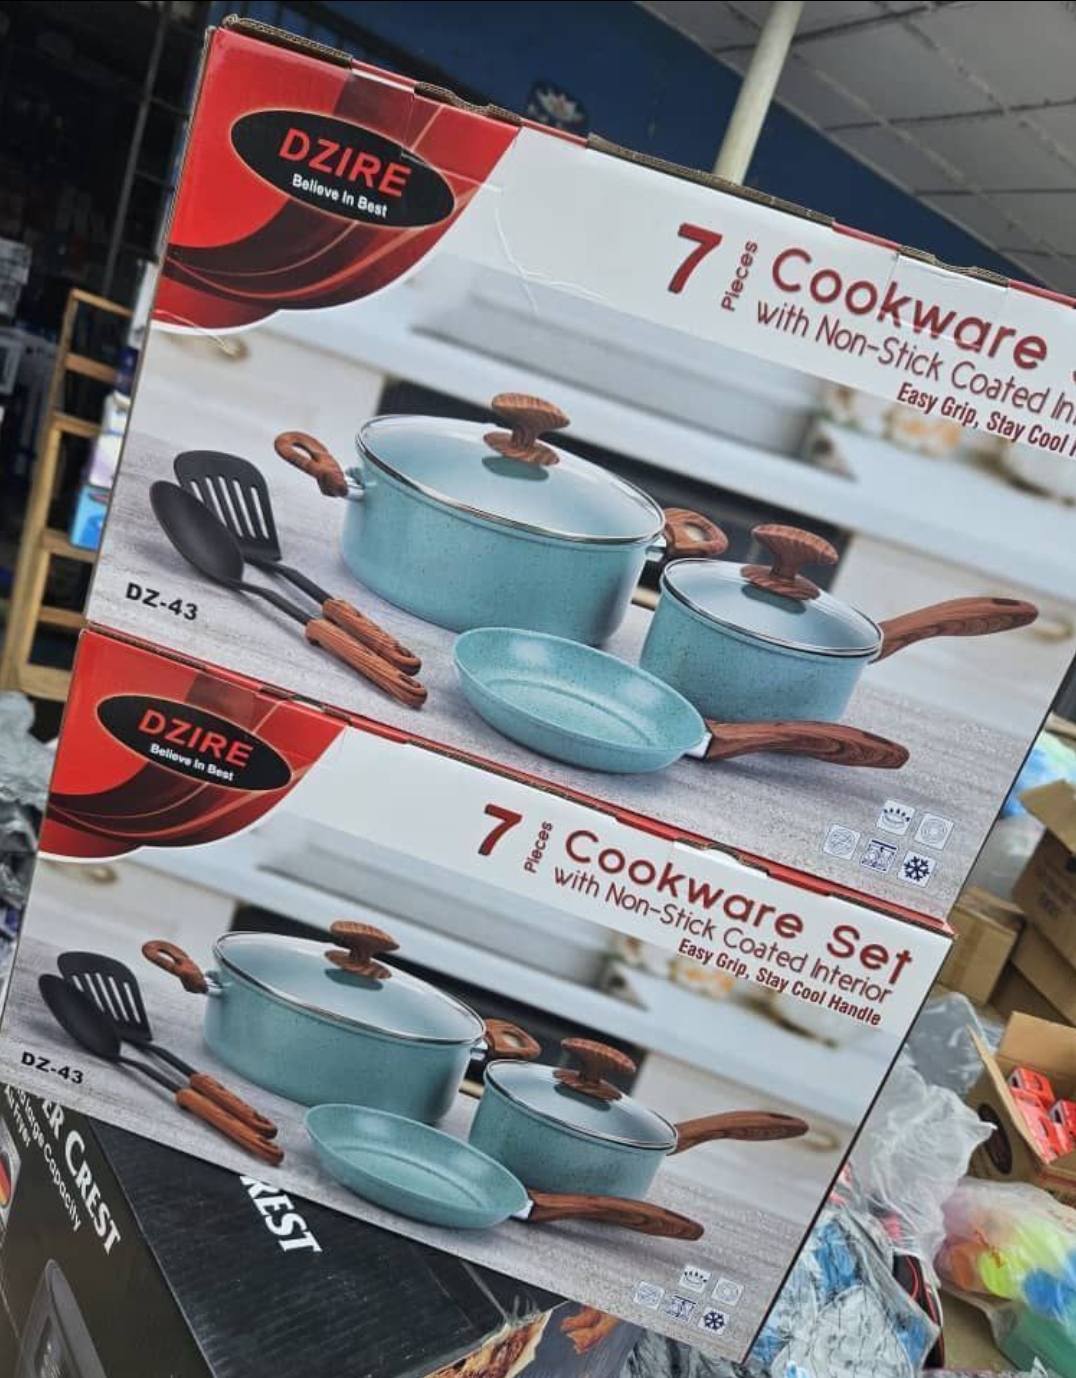 Dz43…Dzire 7Pcs Nonstick Cookware with Coated Inner